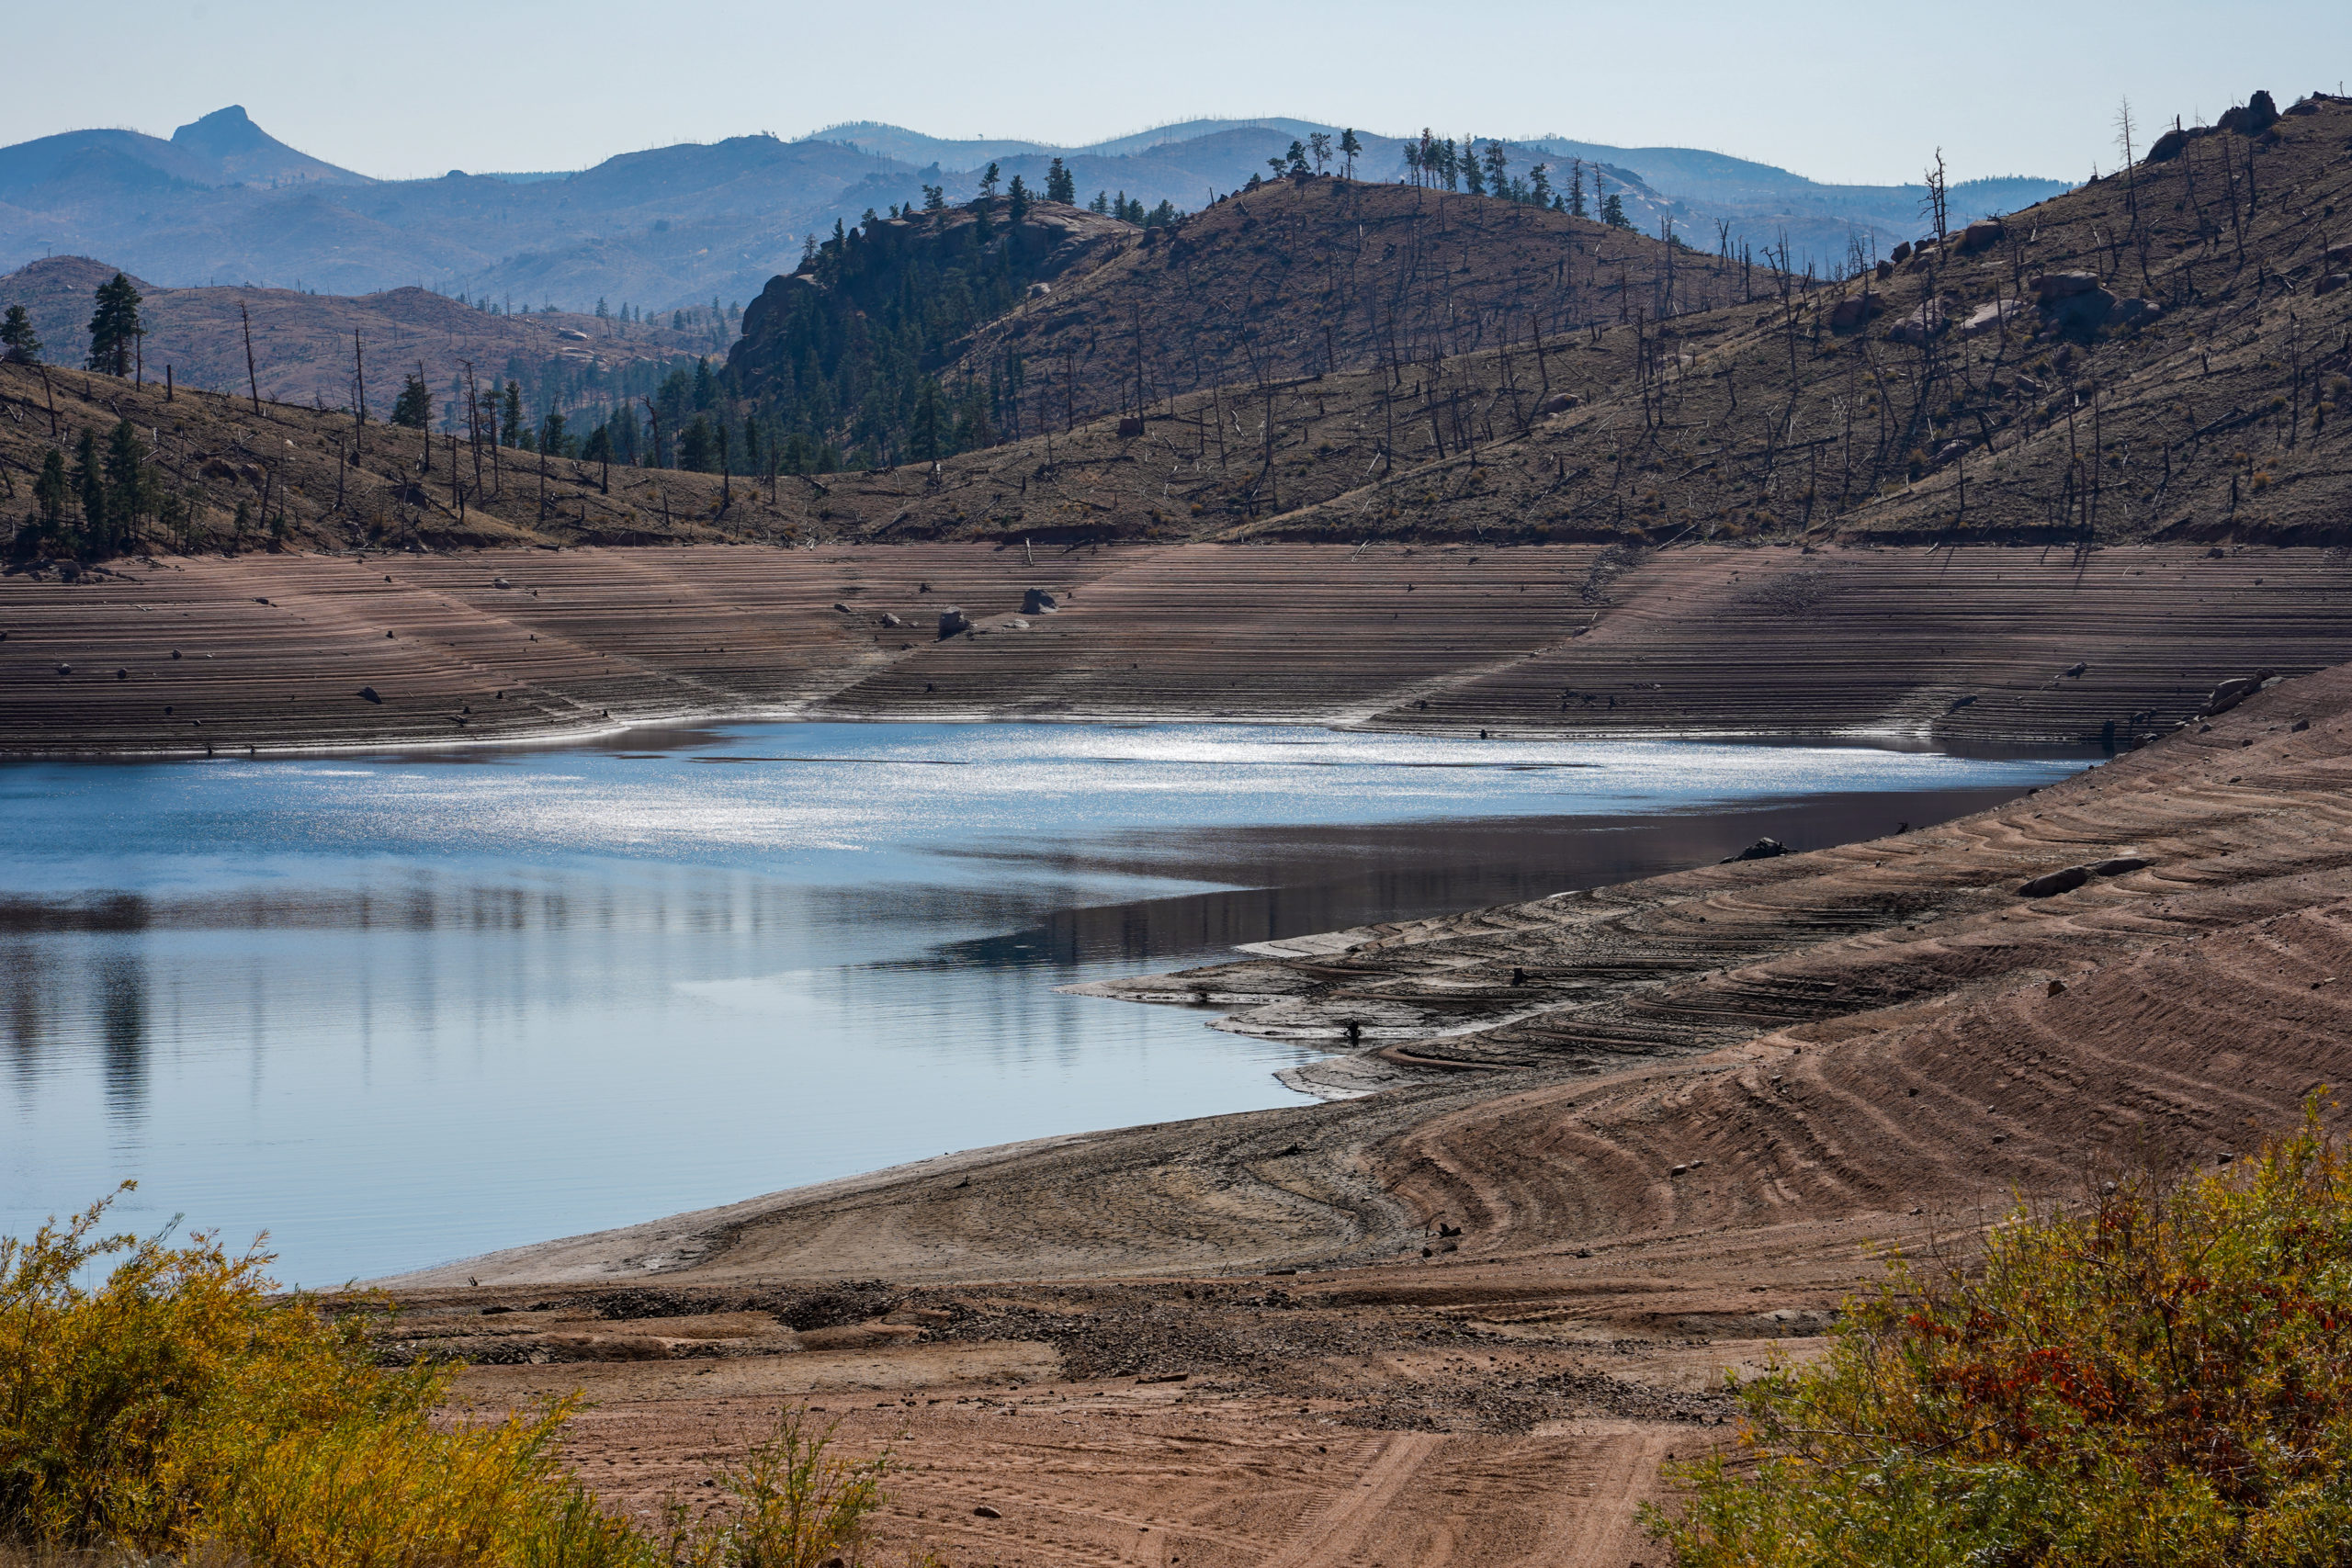 Cheesman Reservoir which straddles Douglass and Jefferson counties was at 46% of capacity in October 2020. The reservoir will need a strong runoff in 2021 to fill. Photo credit: Denver Water.